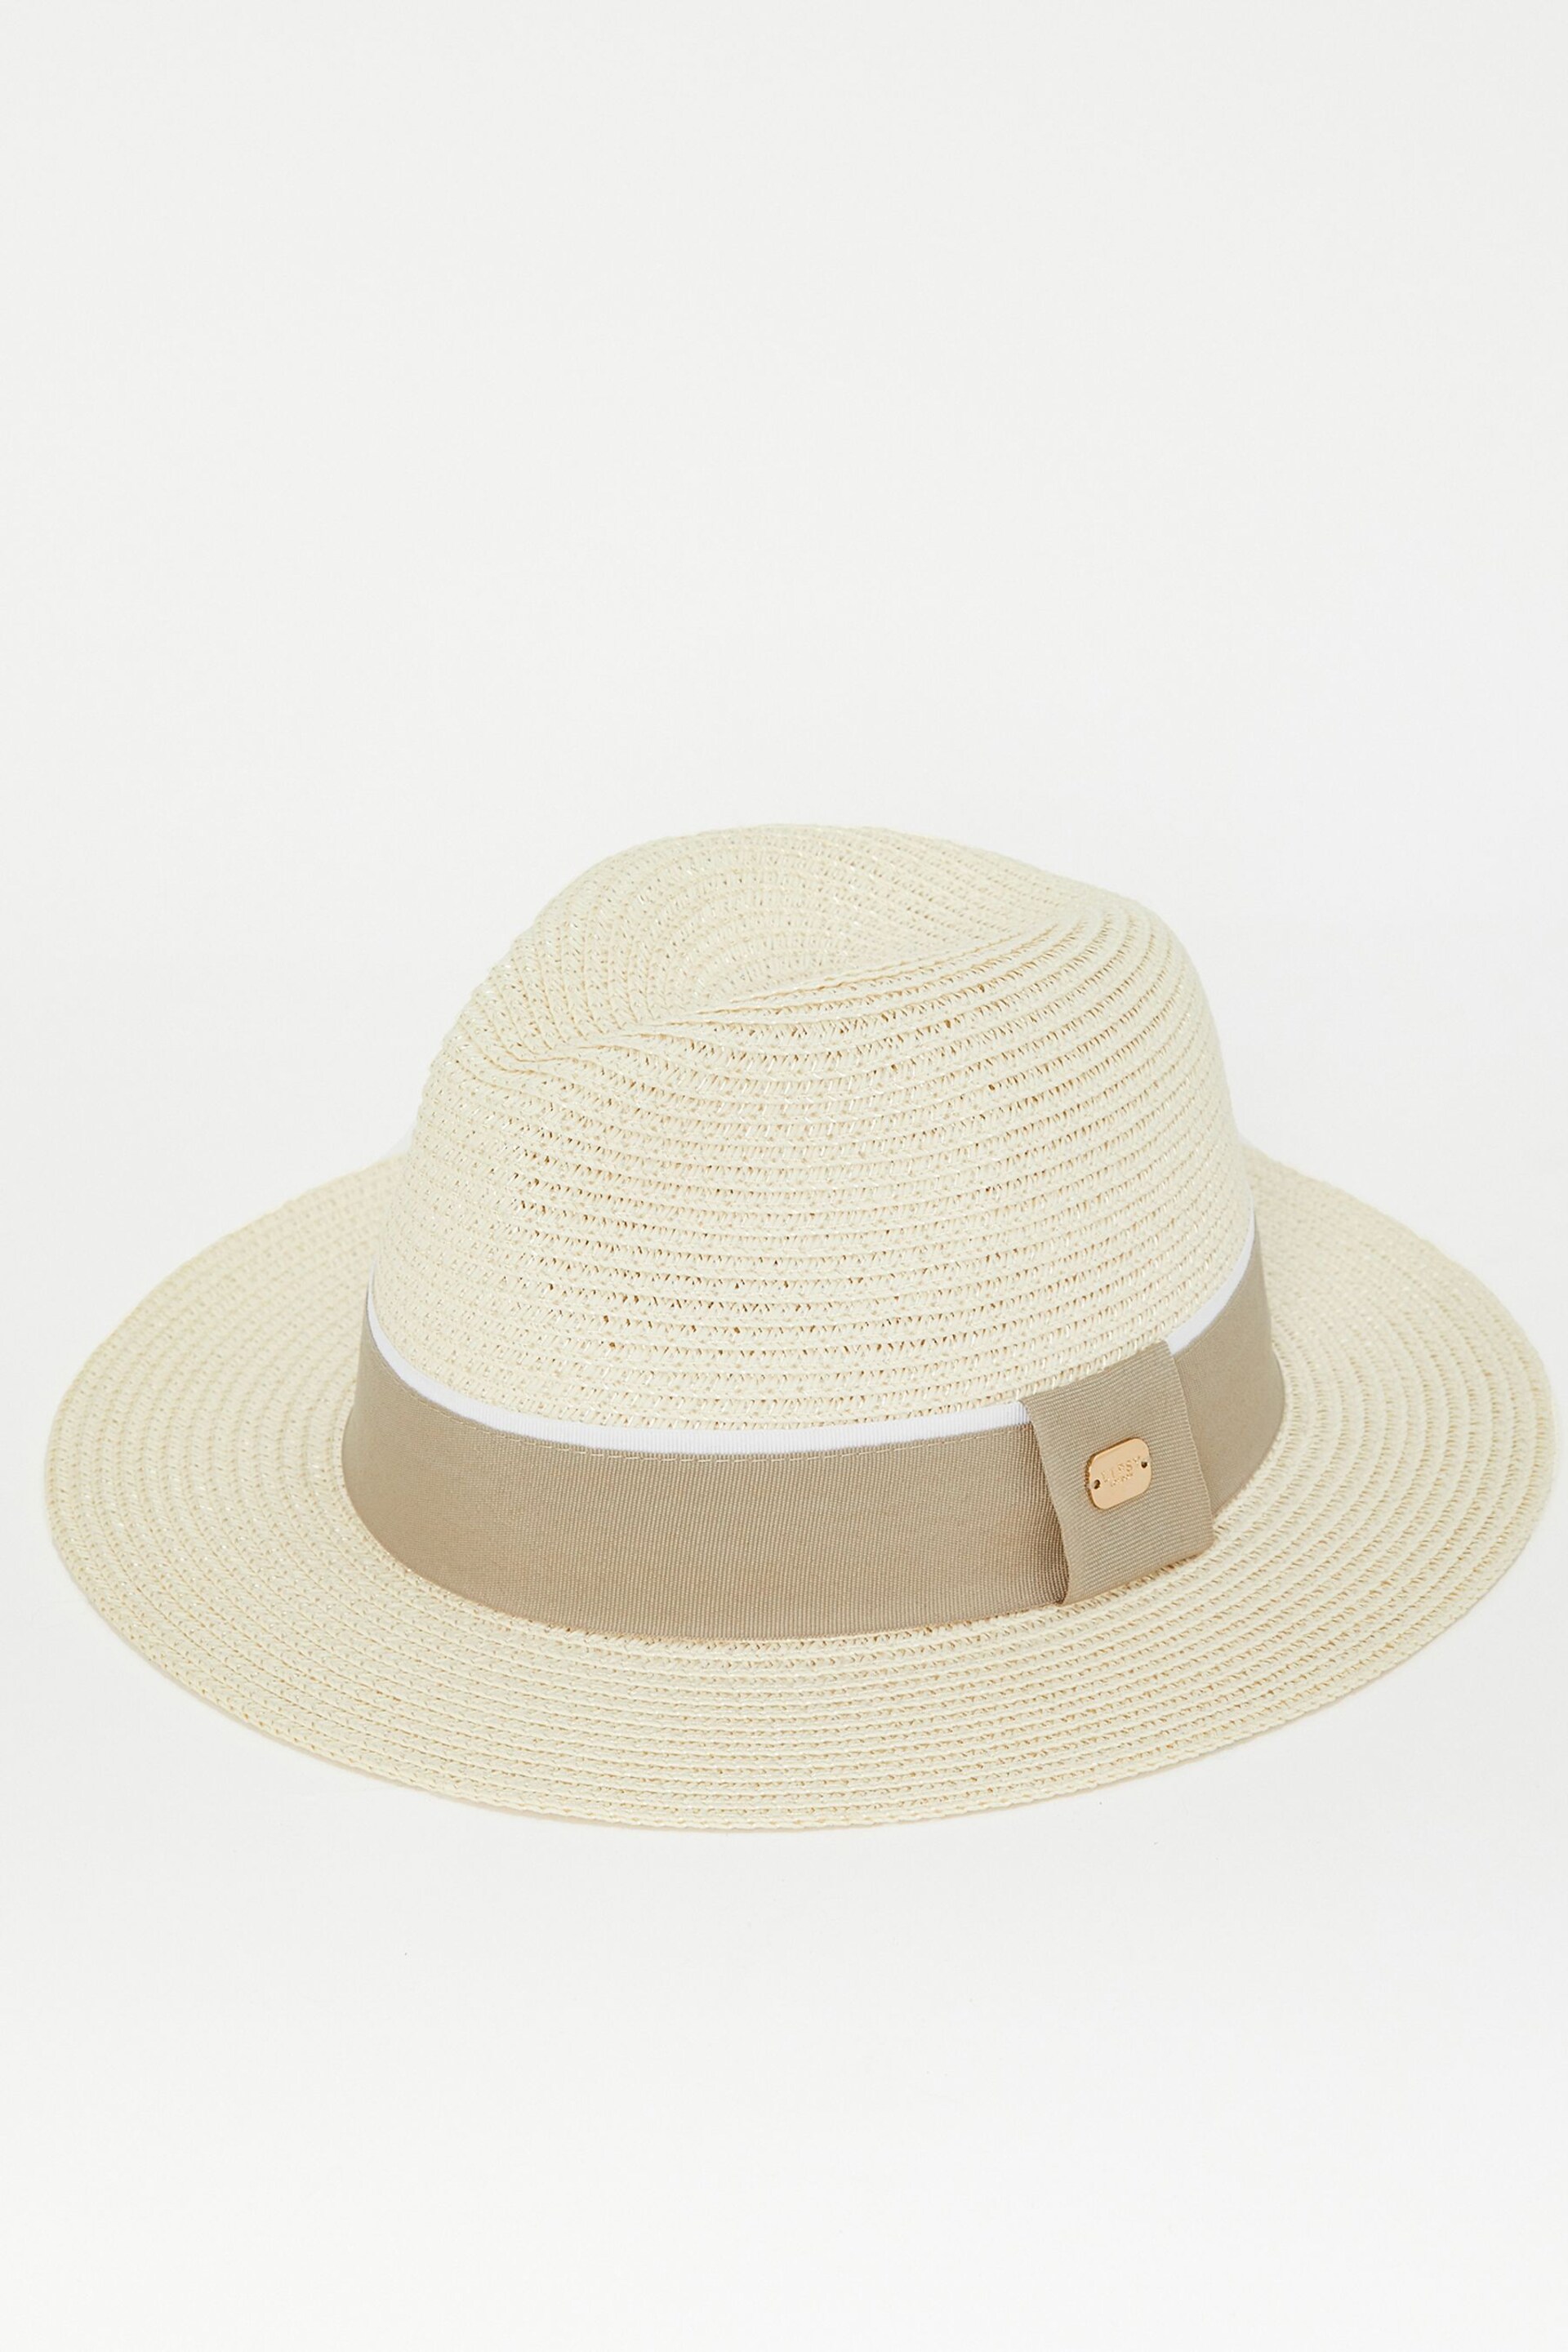 Lipsy Taupe Brown Neutral Straw Fedora Hat - Image 4 of 4